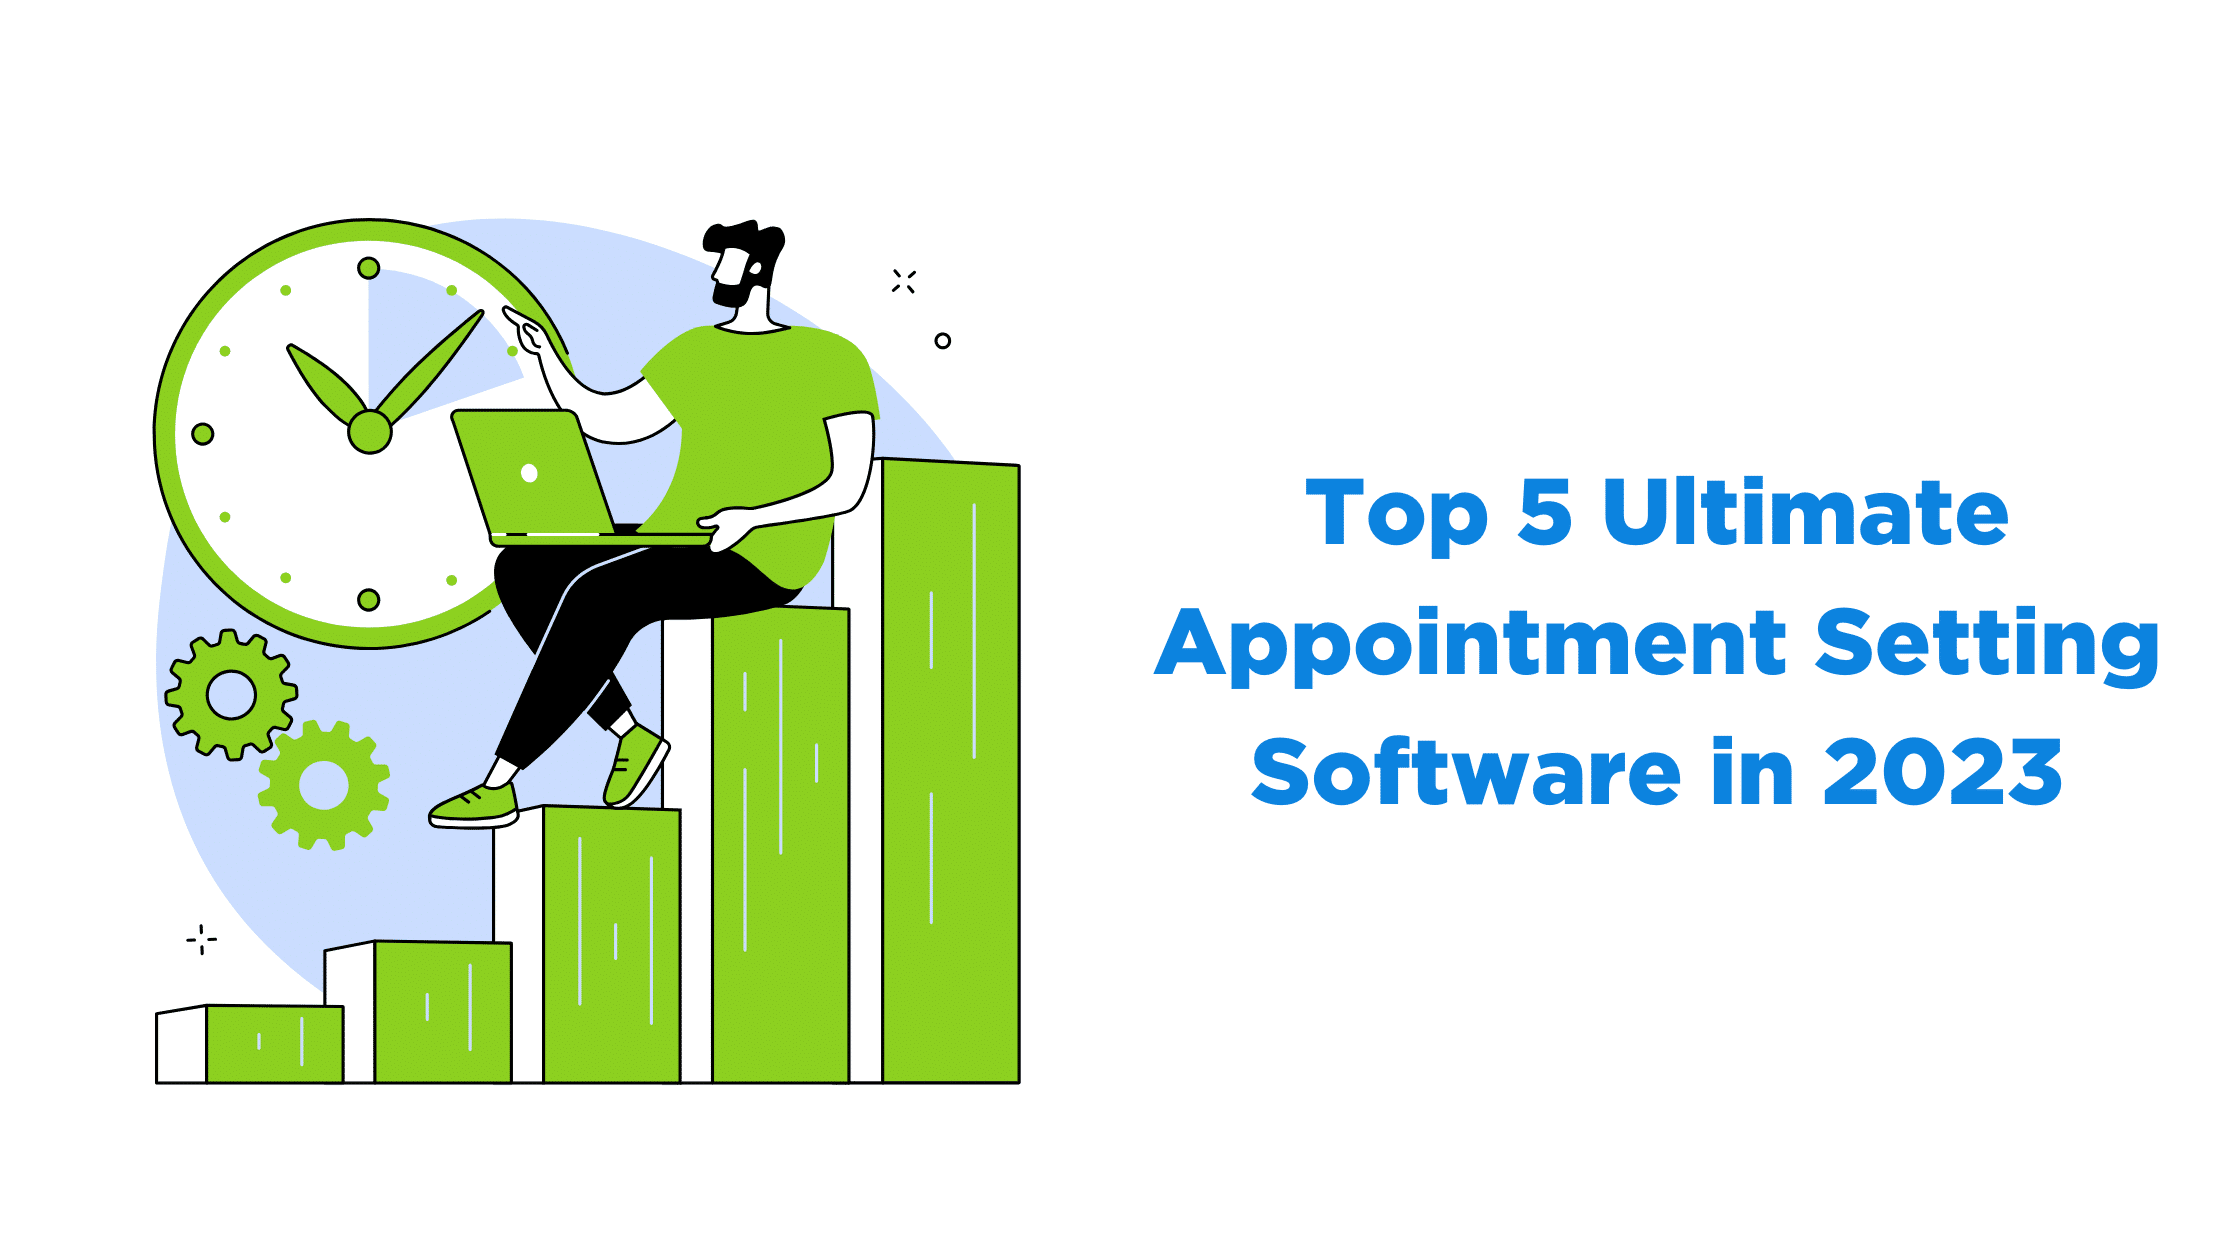 Top 5 Ultimate Appointment Setting Software In 2023